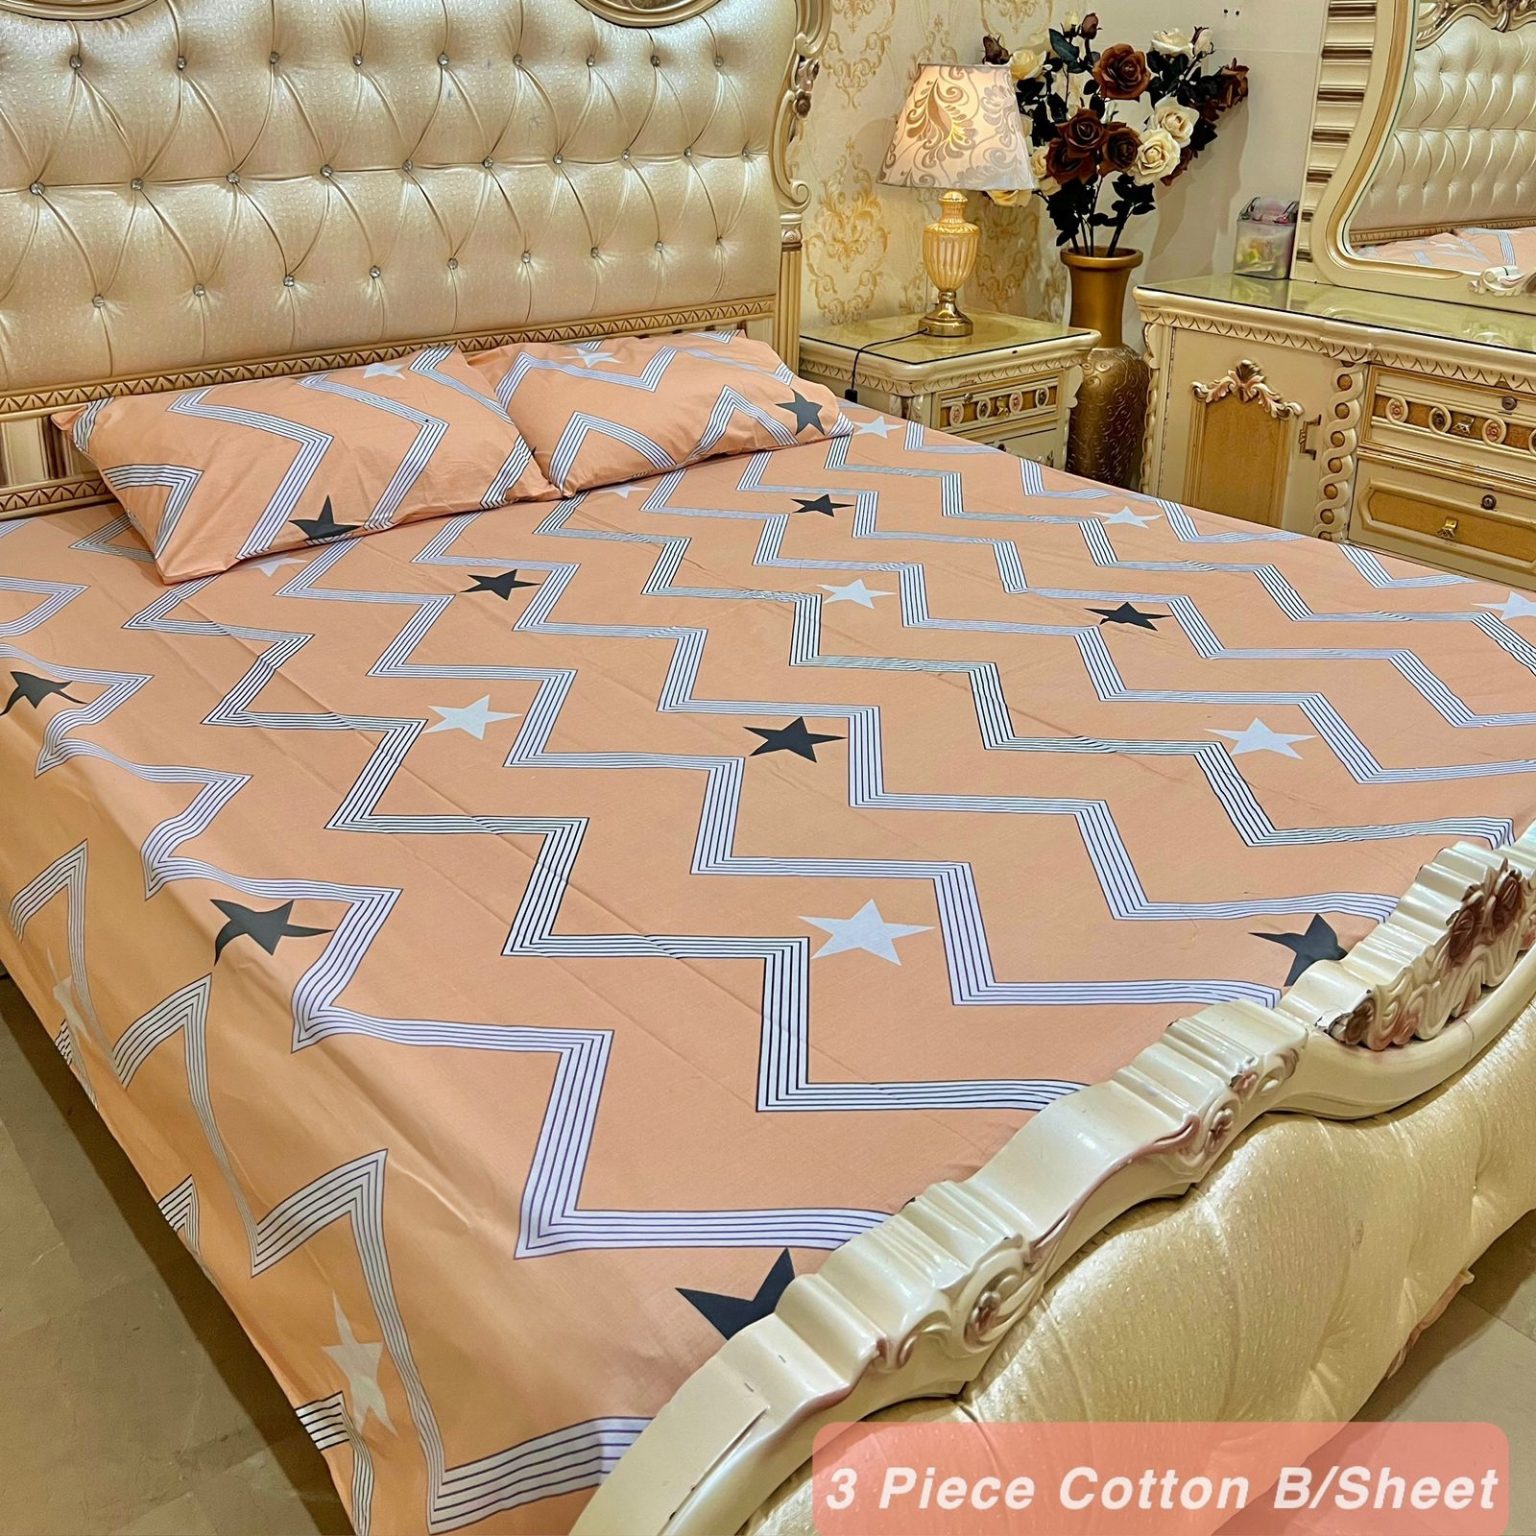 Cotton printed bedsheets